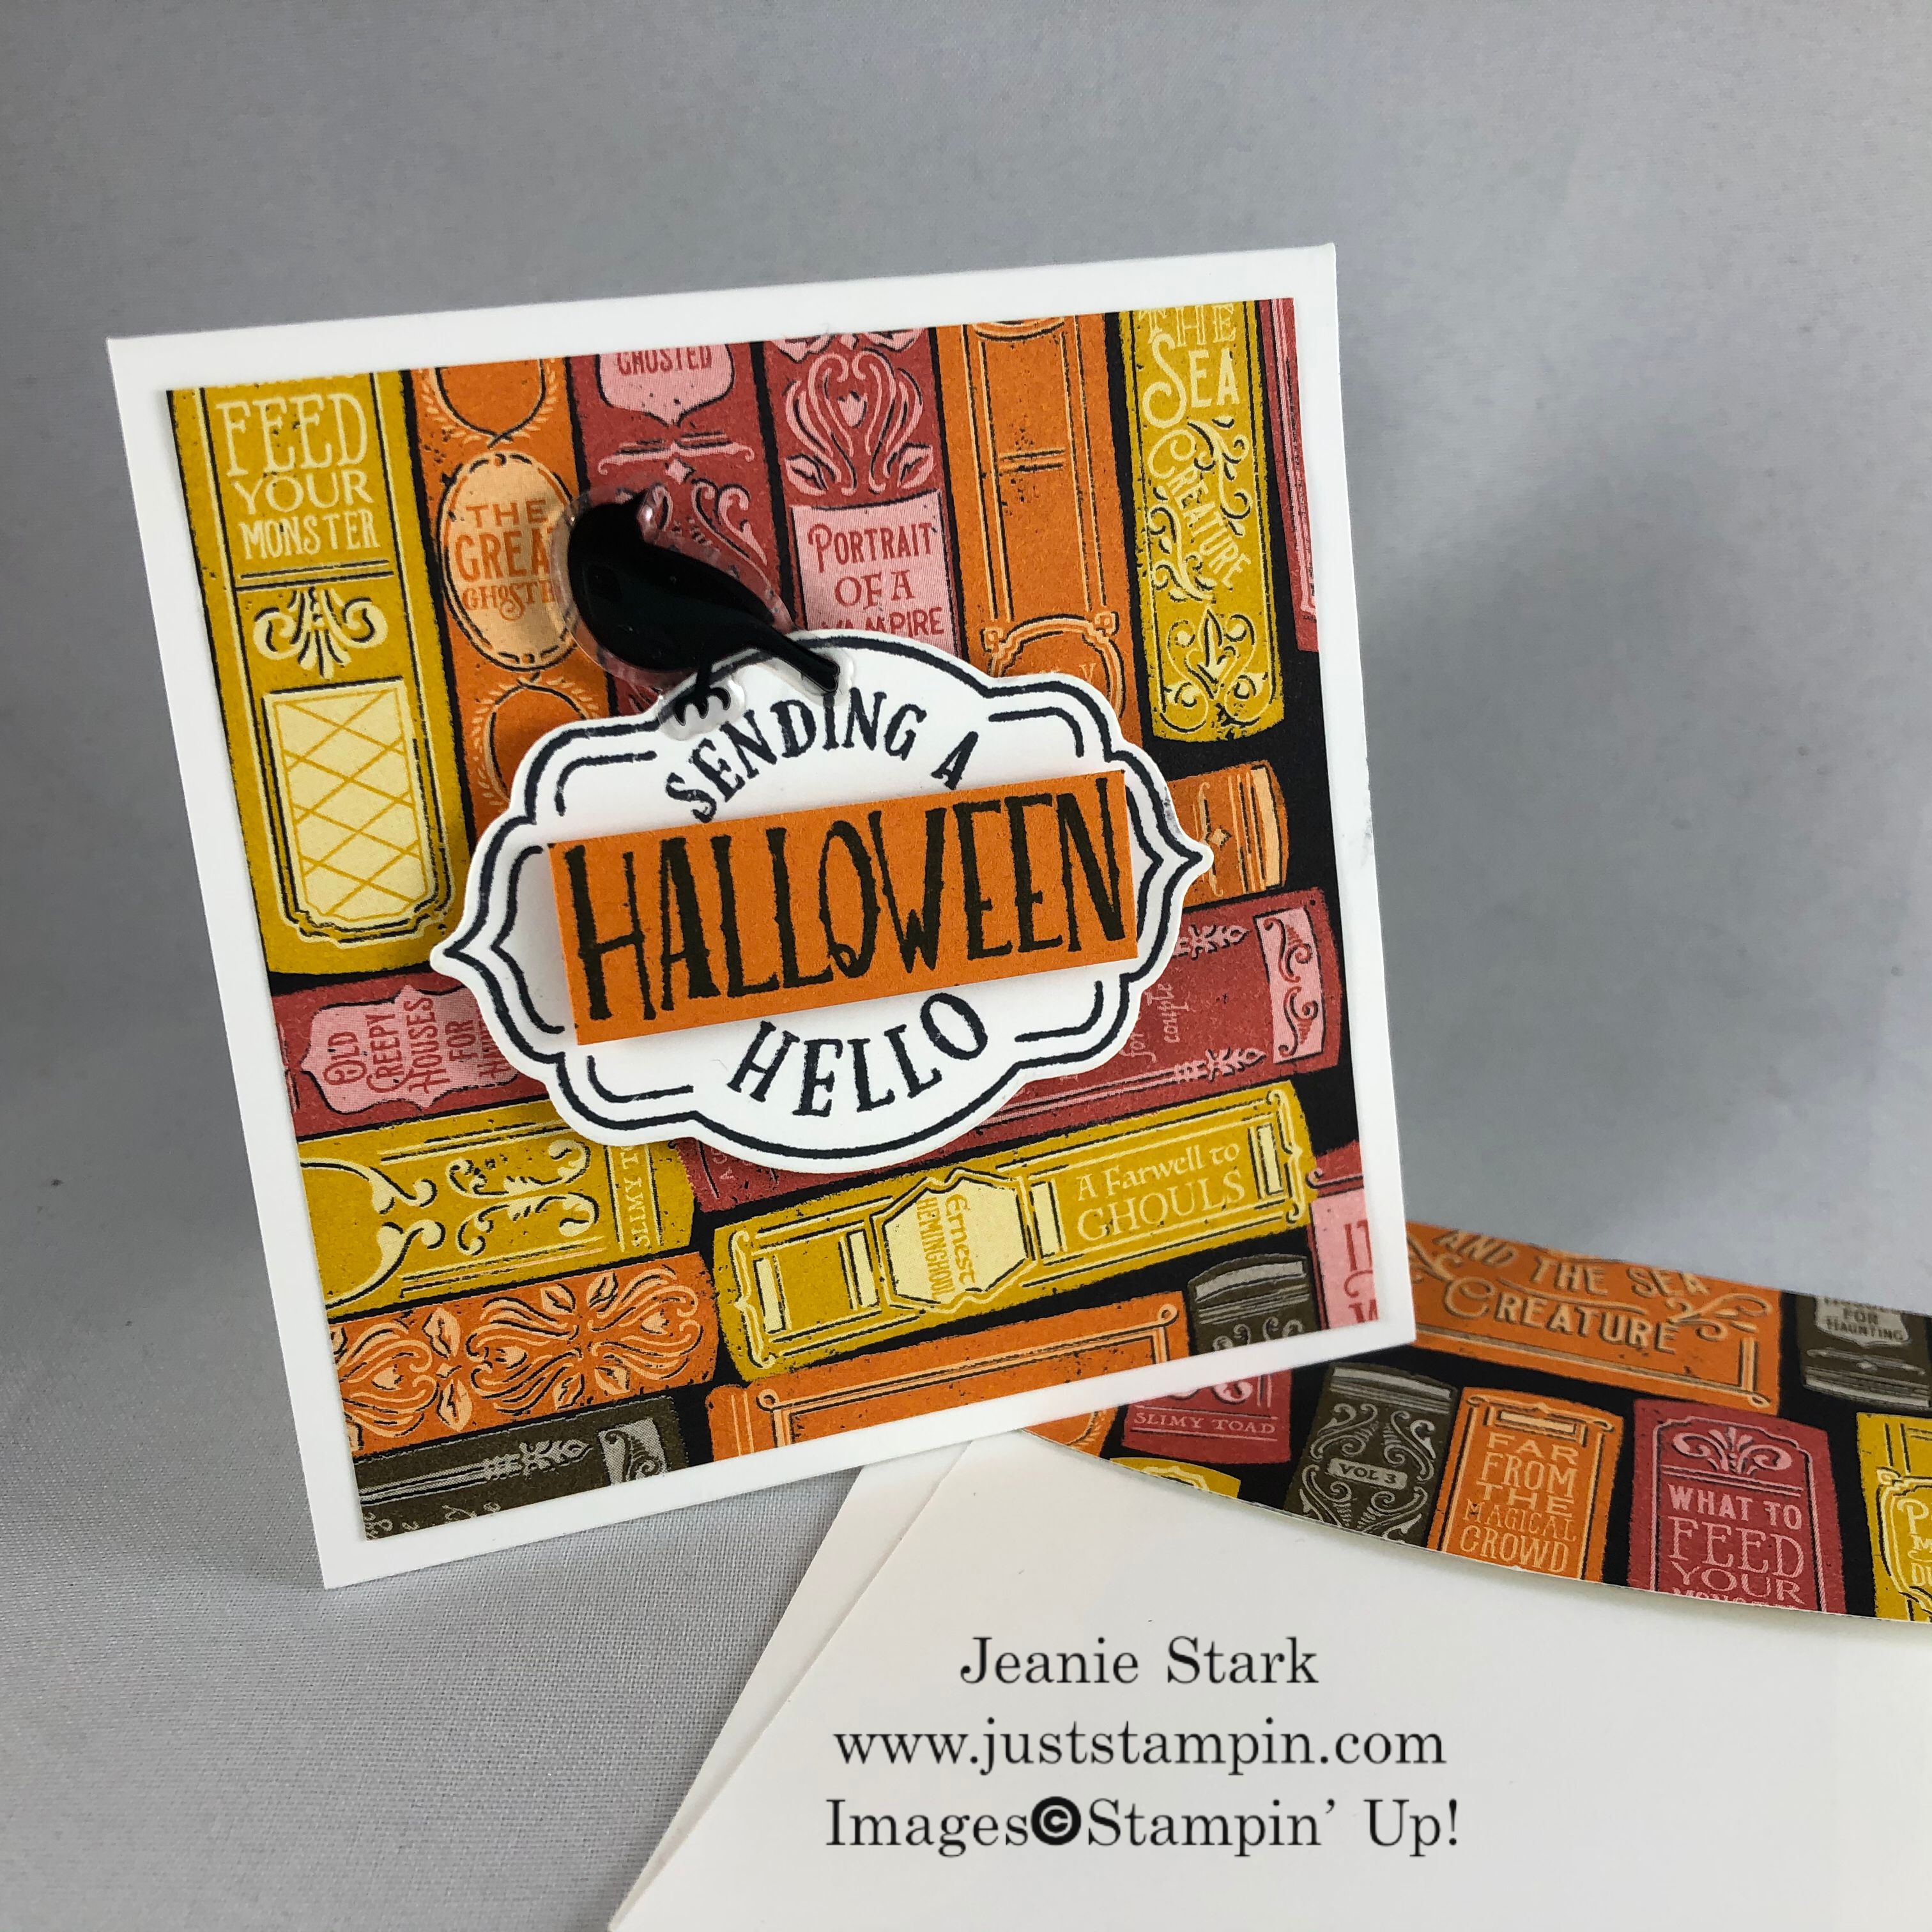 Stampin' Up! Tags Tags Tags Bundle and Monster Bash Designer Series Paper 3 x 3 Halloween note card idea - Jeanie Stark StampinUp